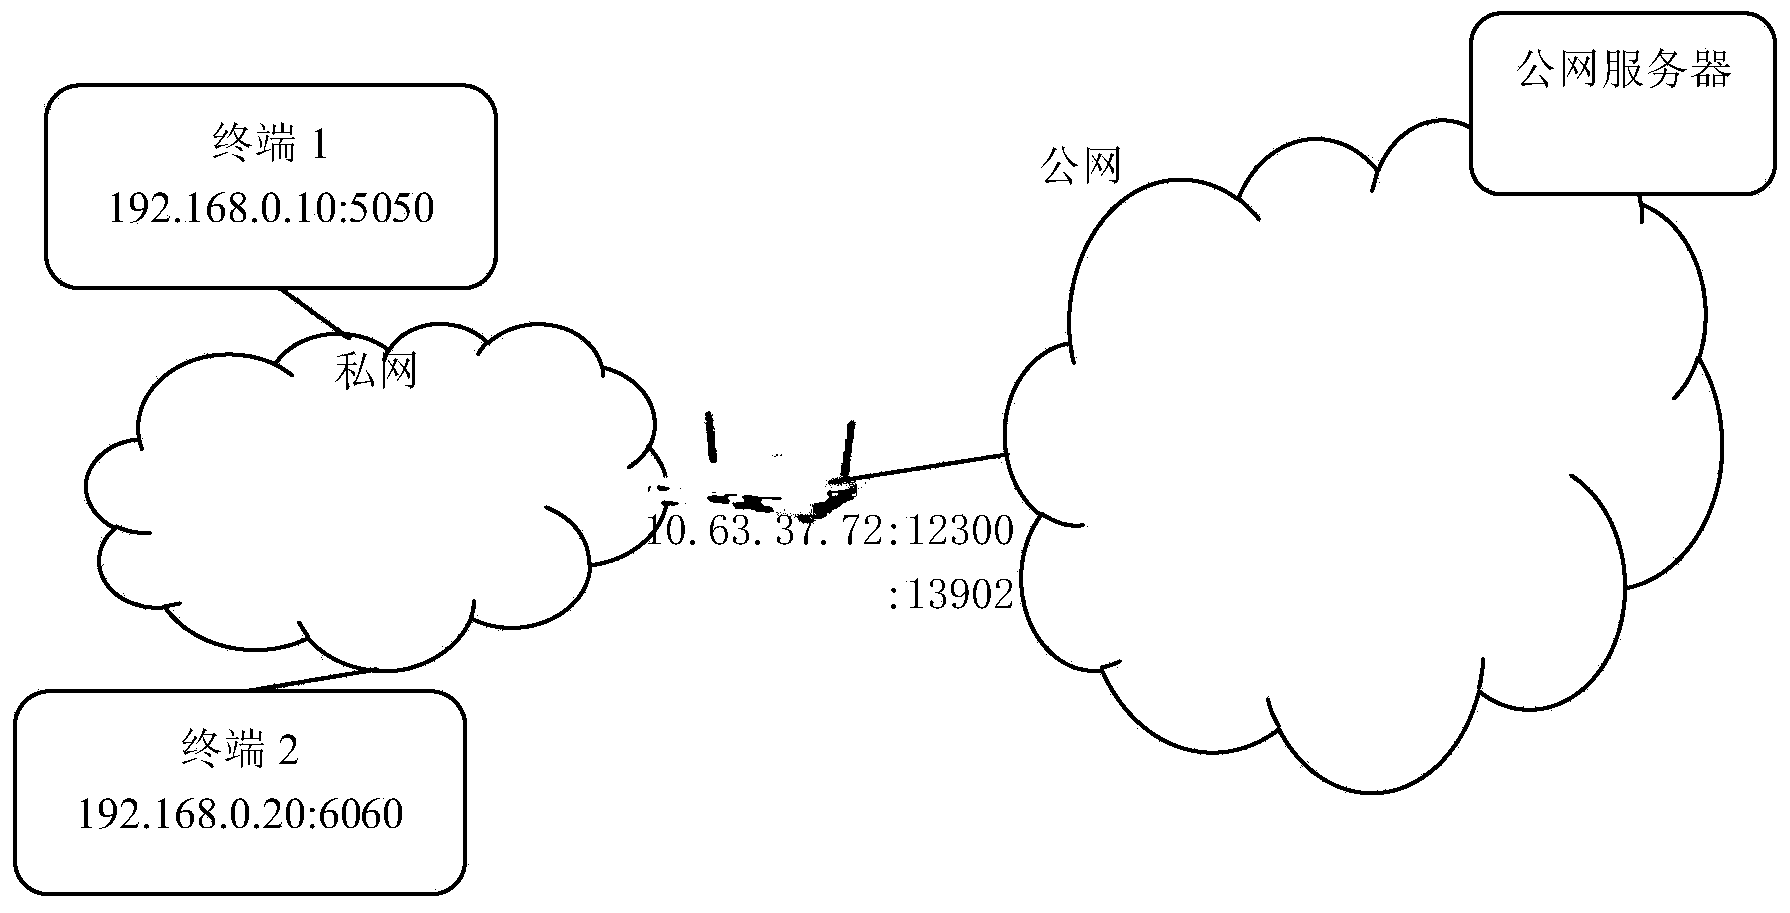 Method for fast creating team communication group